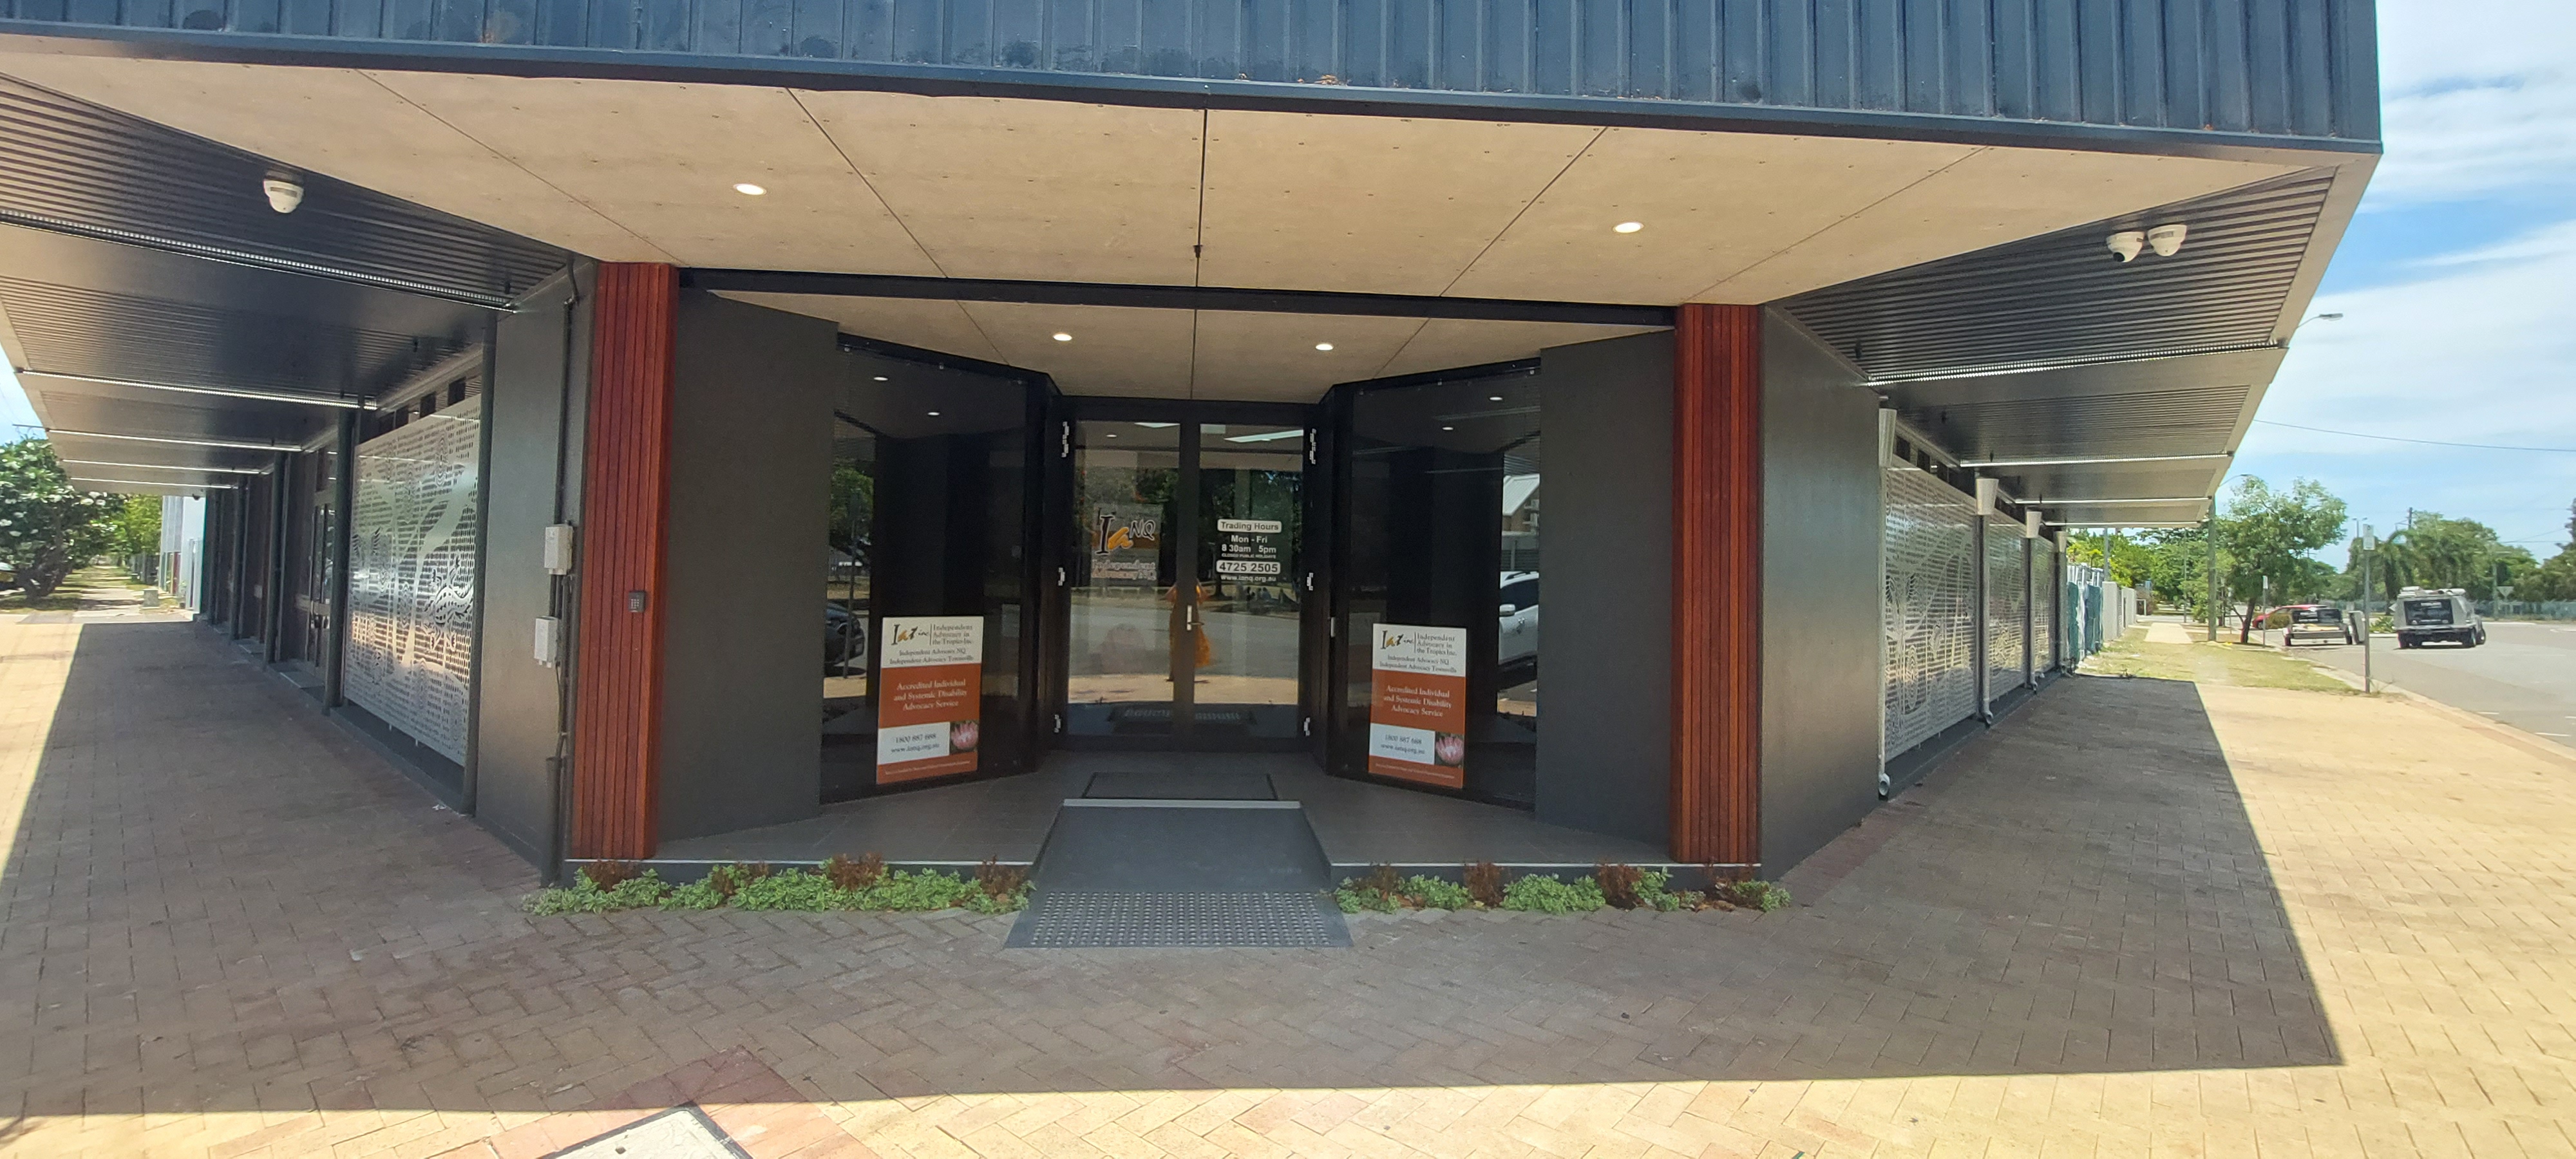 IANQ's Barlow Street Office building - picture of front entrance and down both sides of building